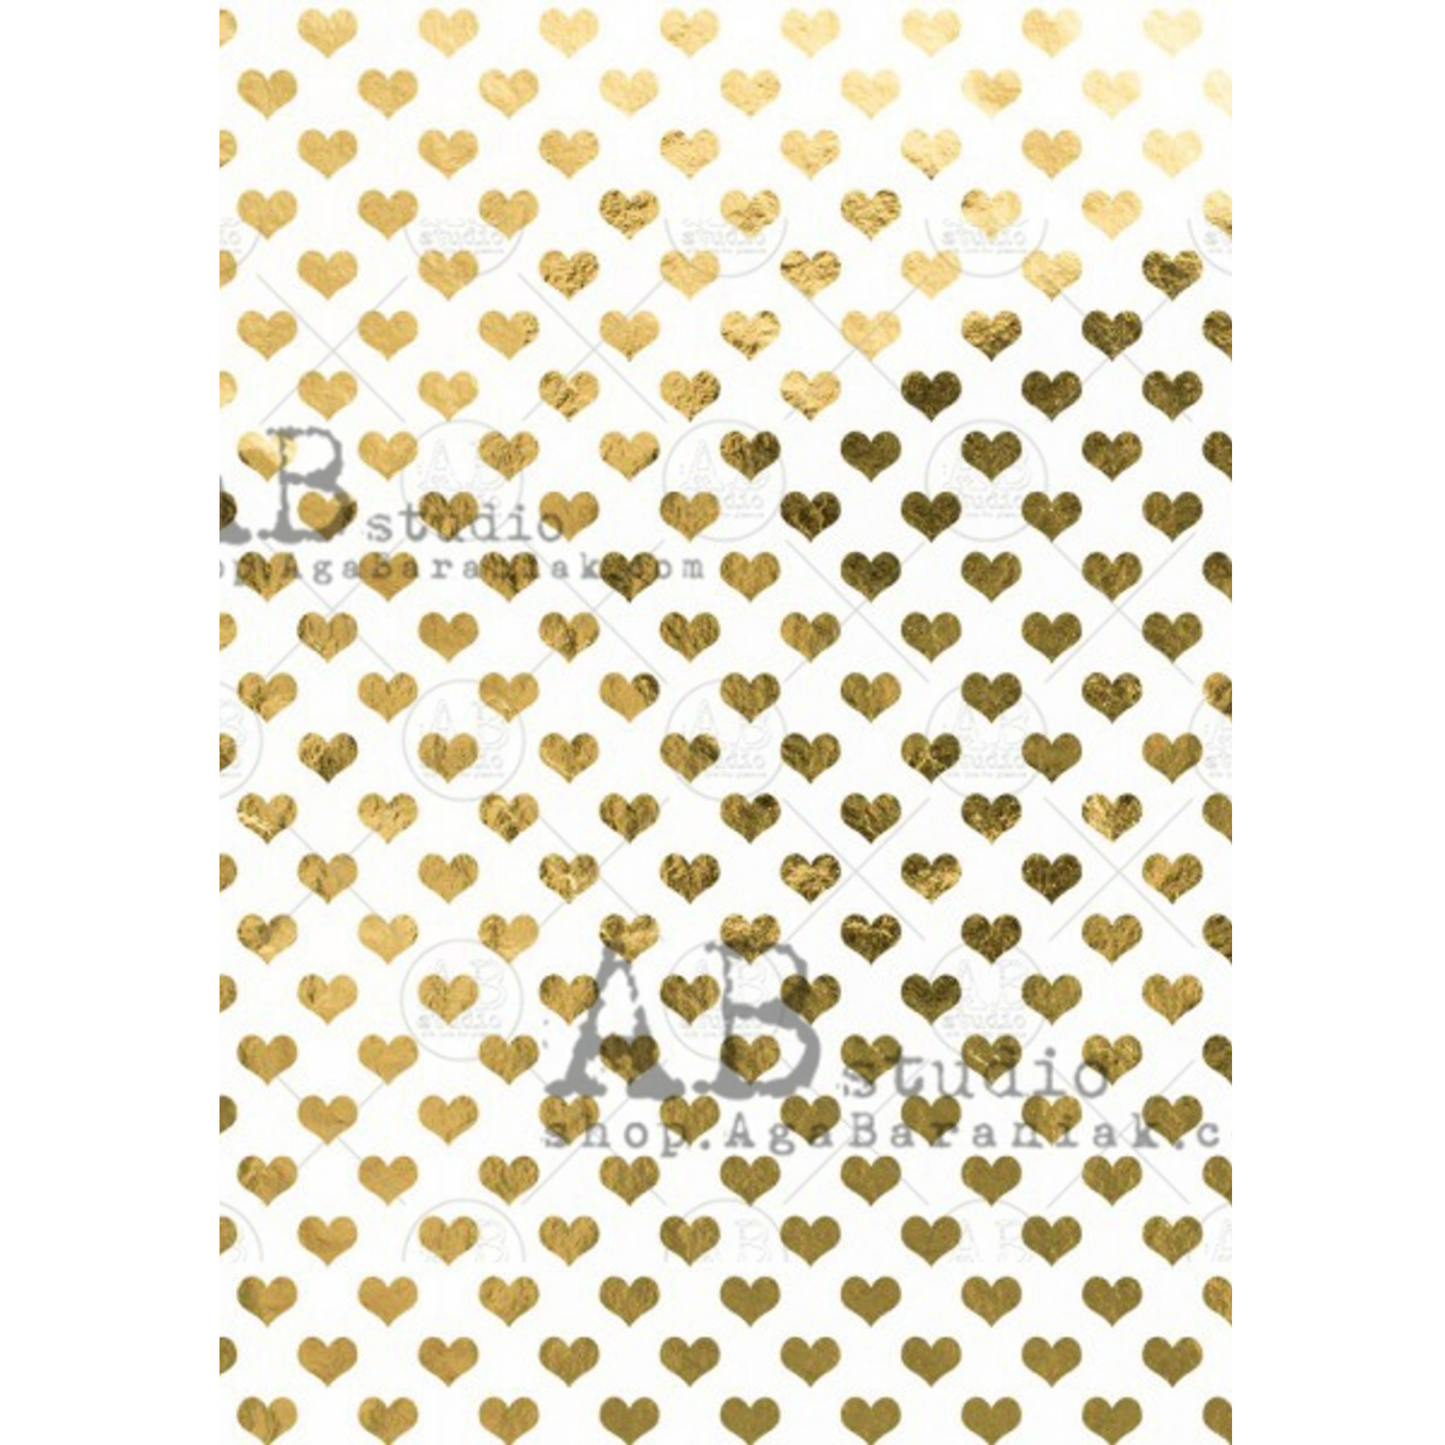 "Gilded Gold Hearts" decoupage rice paper by AB Studio available in size A4 at Milton's Daughter.